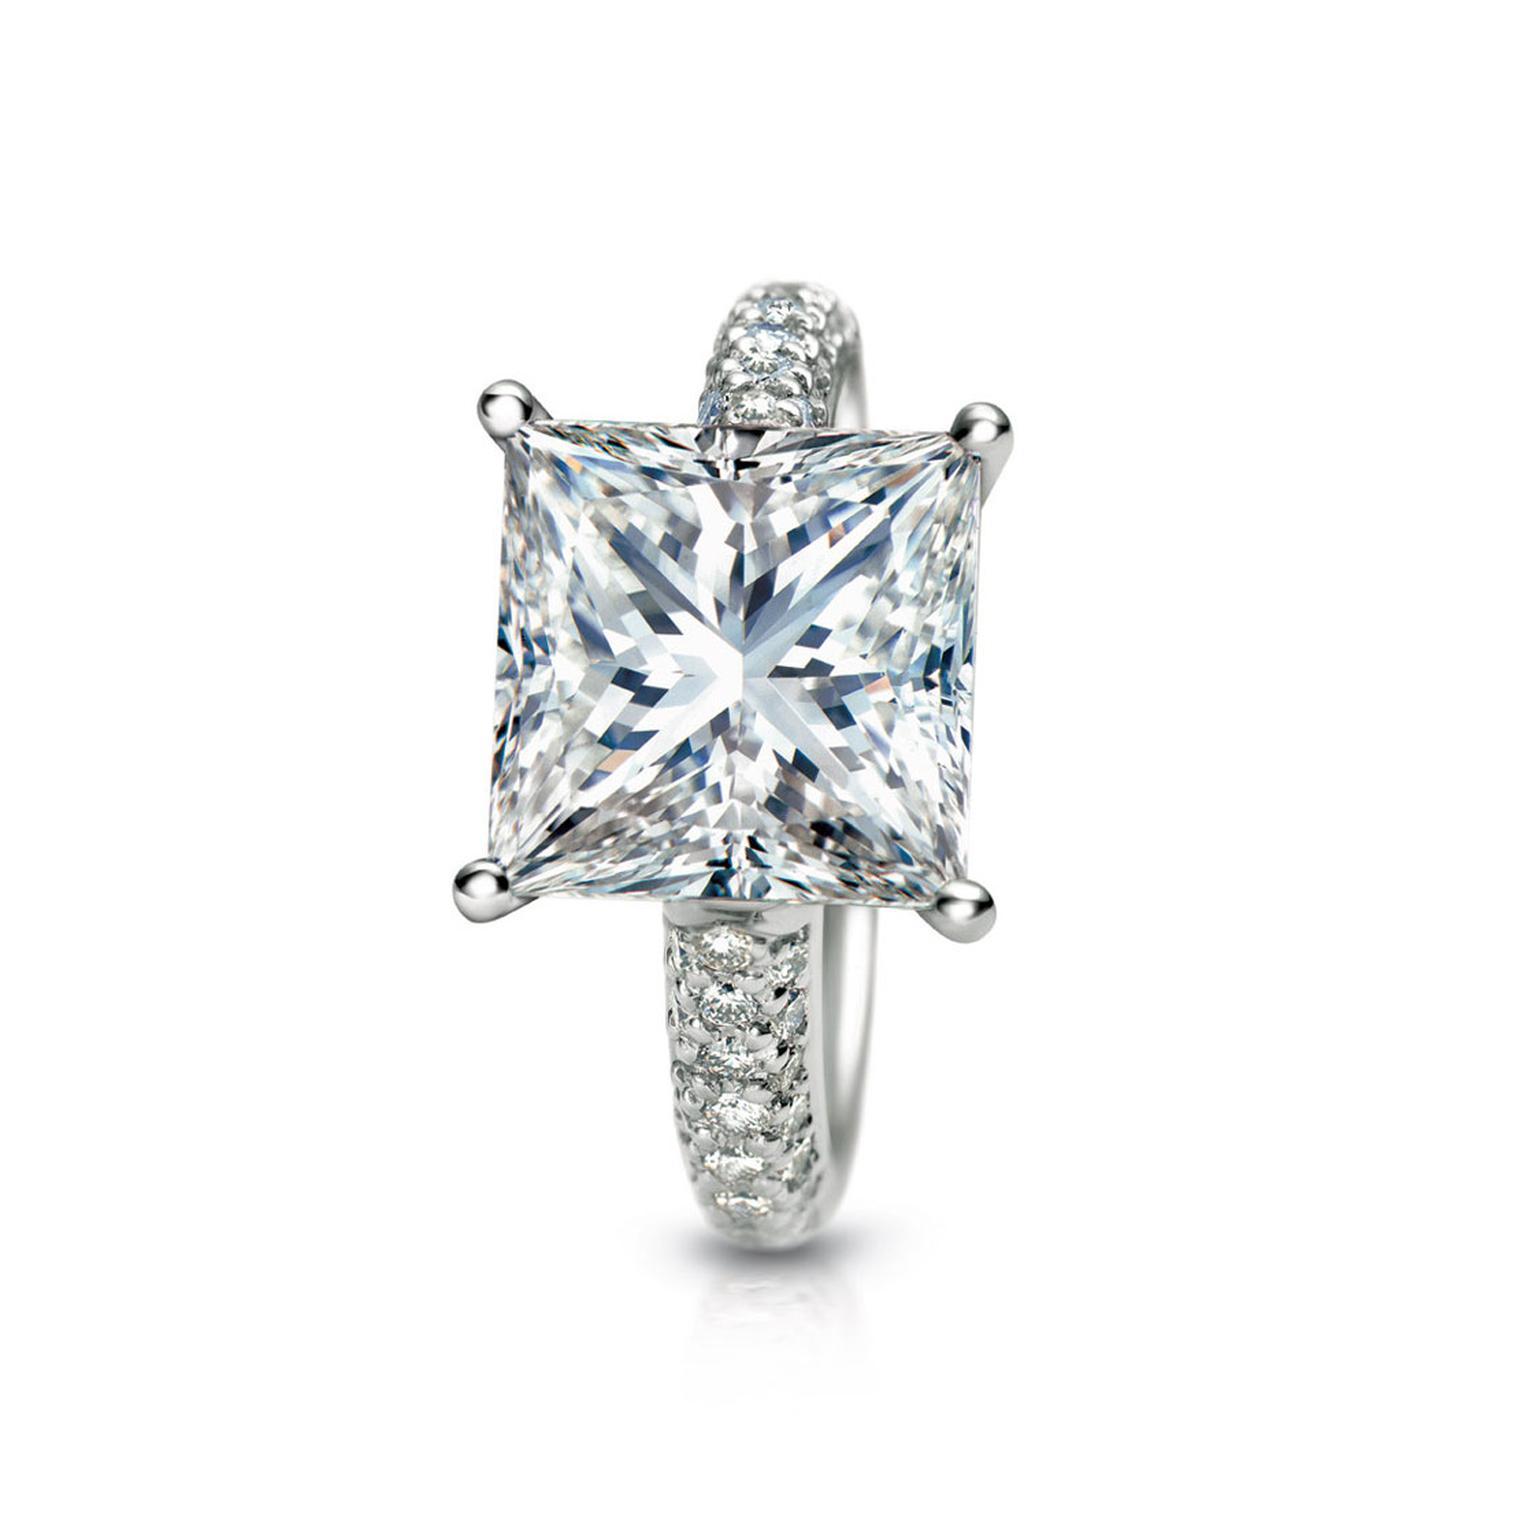 The romance of princess-cut engagement rings